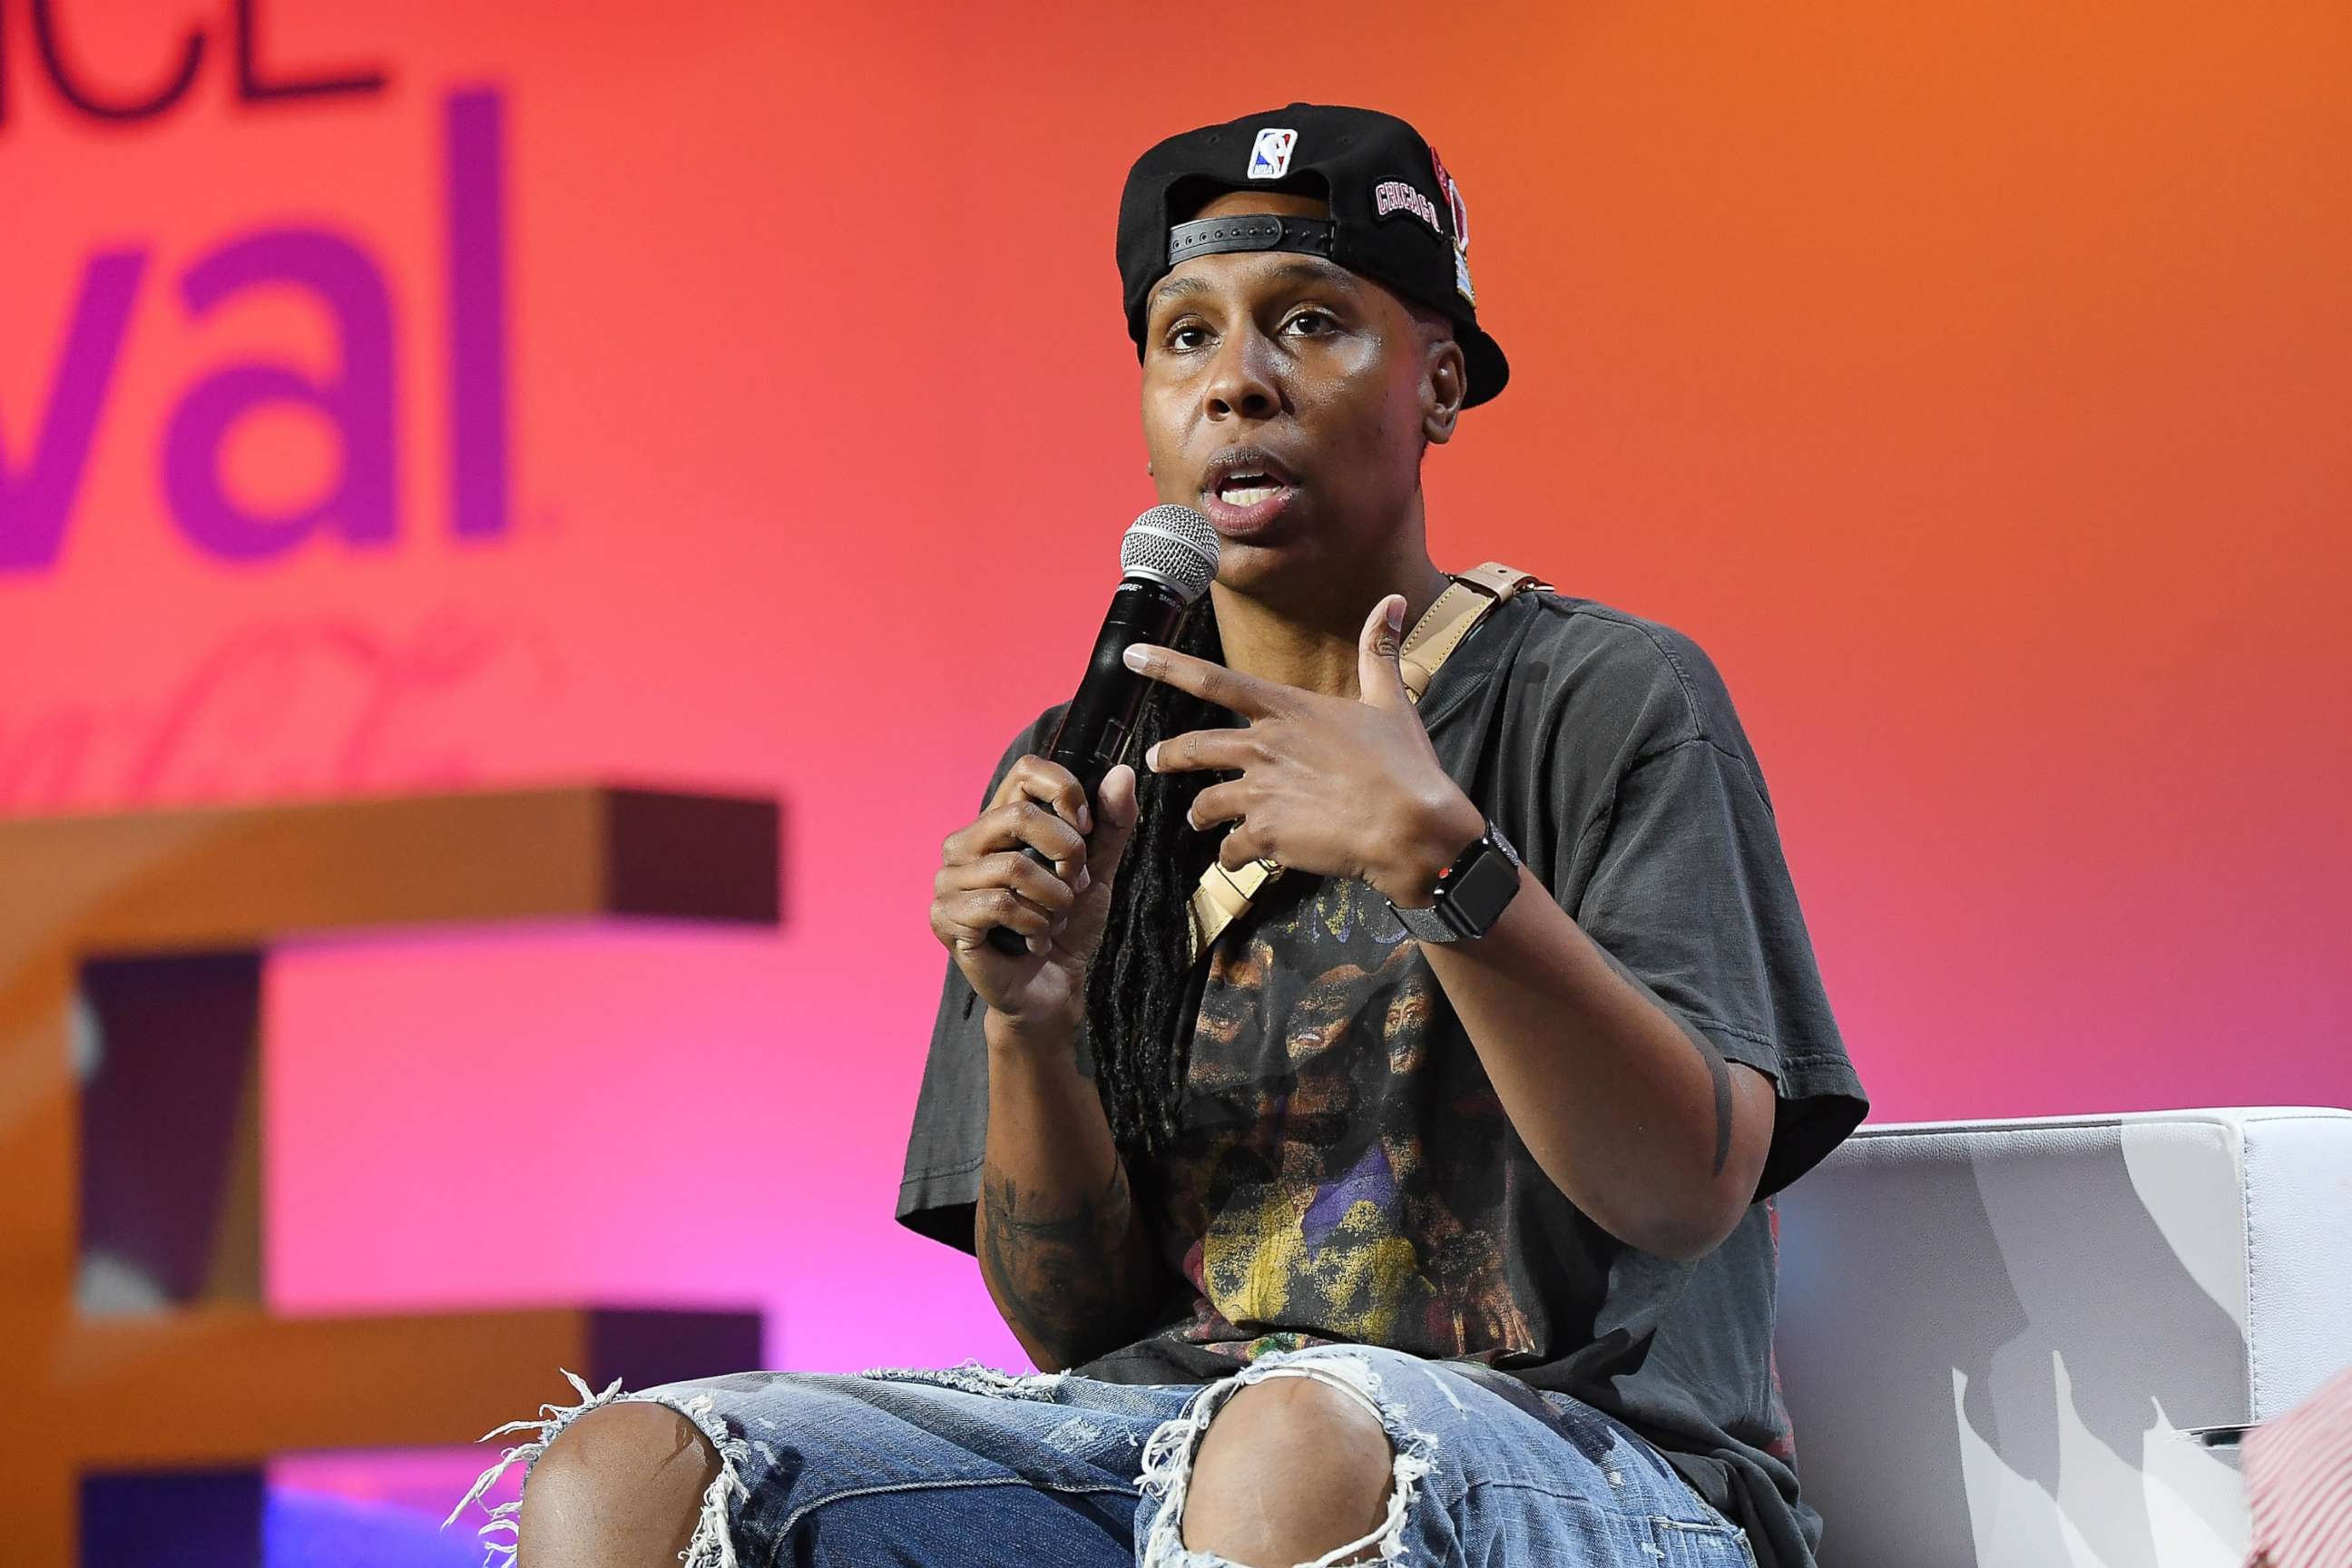 PHOTO: Lena Waithe speaks onstage during the 2018 Essence Festival presented by Coca-Cola at Ernest N. Morial Convention Center, July 6, 2018, in New Orleans.